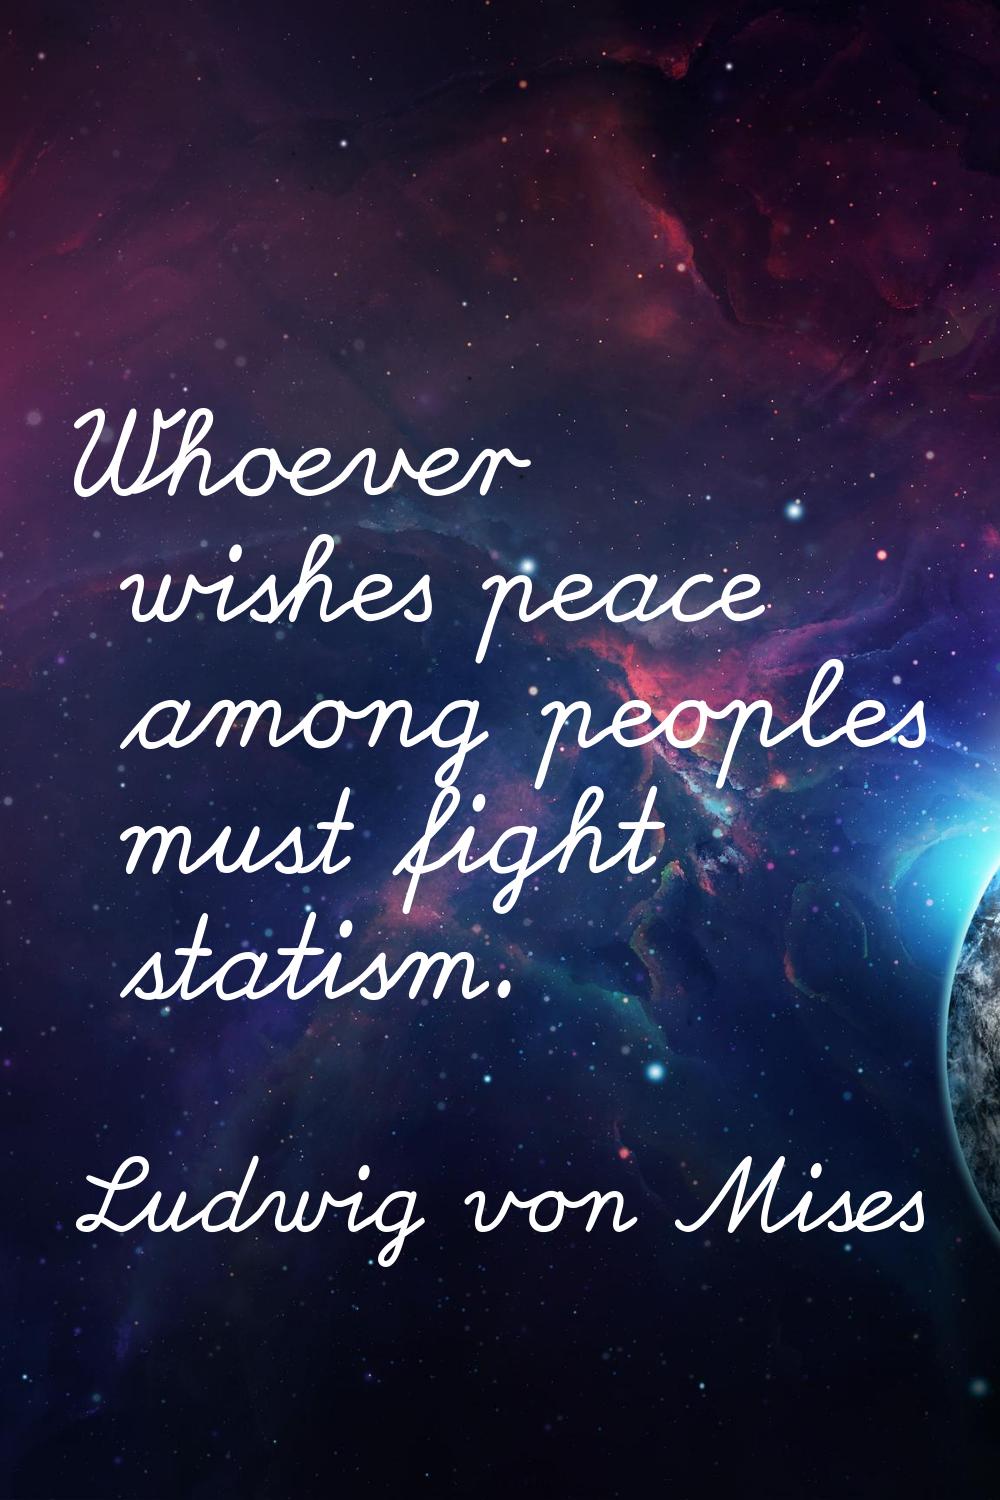 Whoever wishes peace among peoples must fight statism.